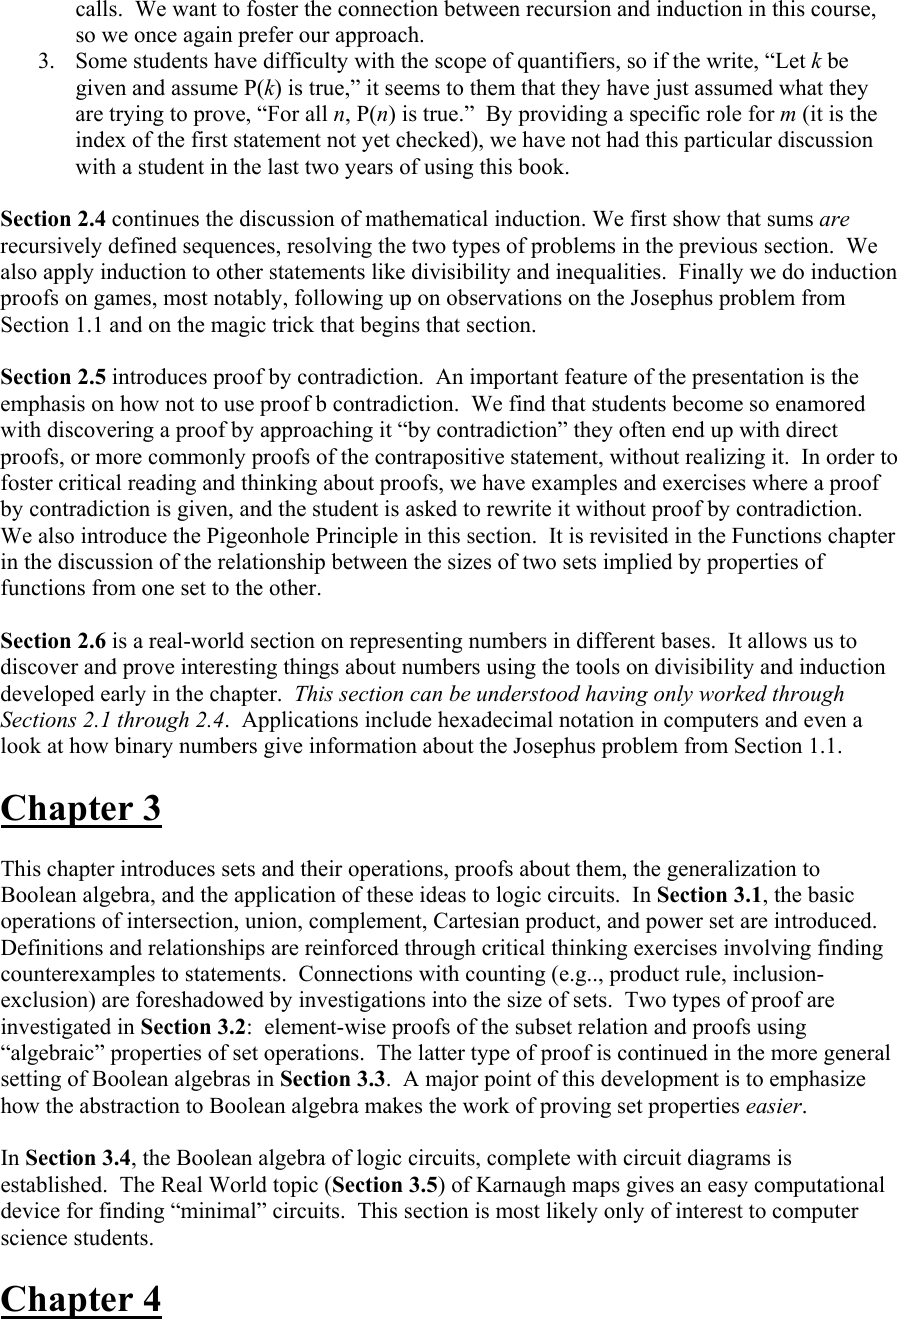 Page 4 of 7 - Section 1 Discrete Instructors Guide